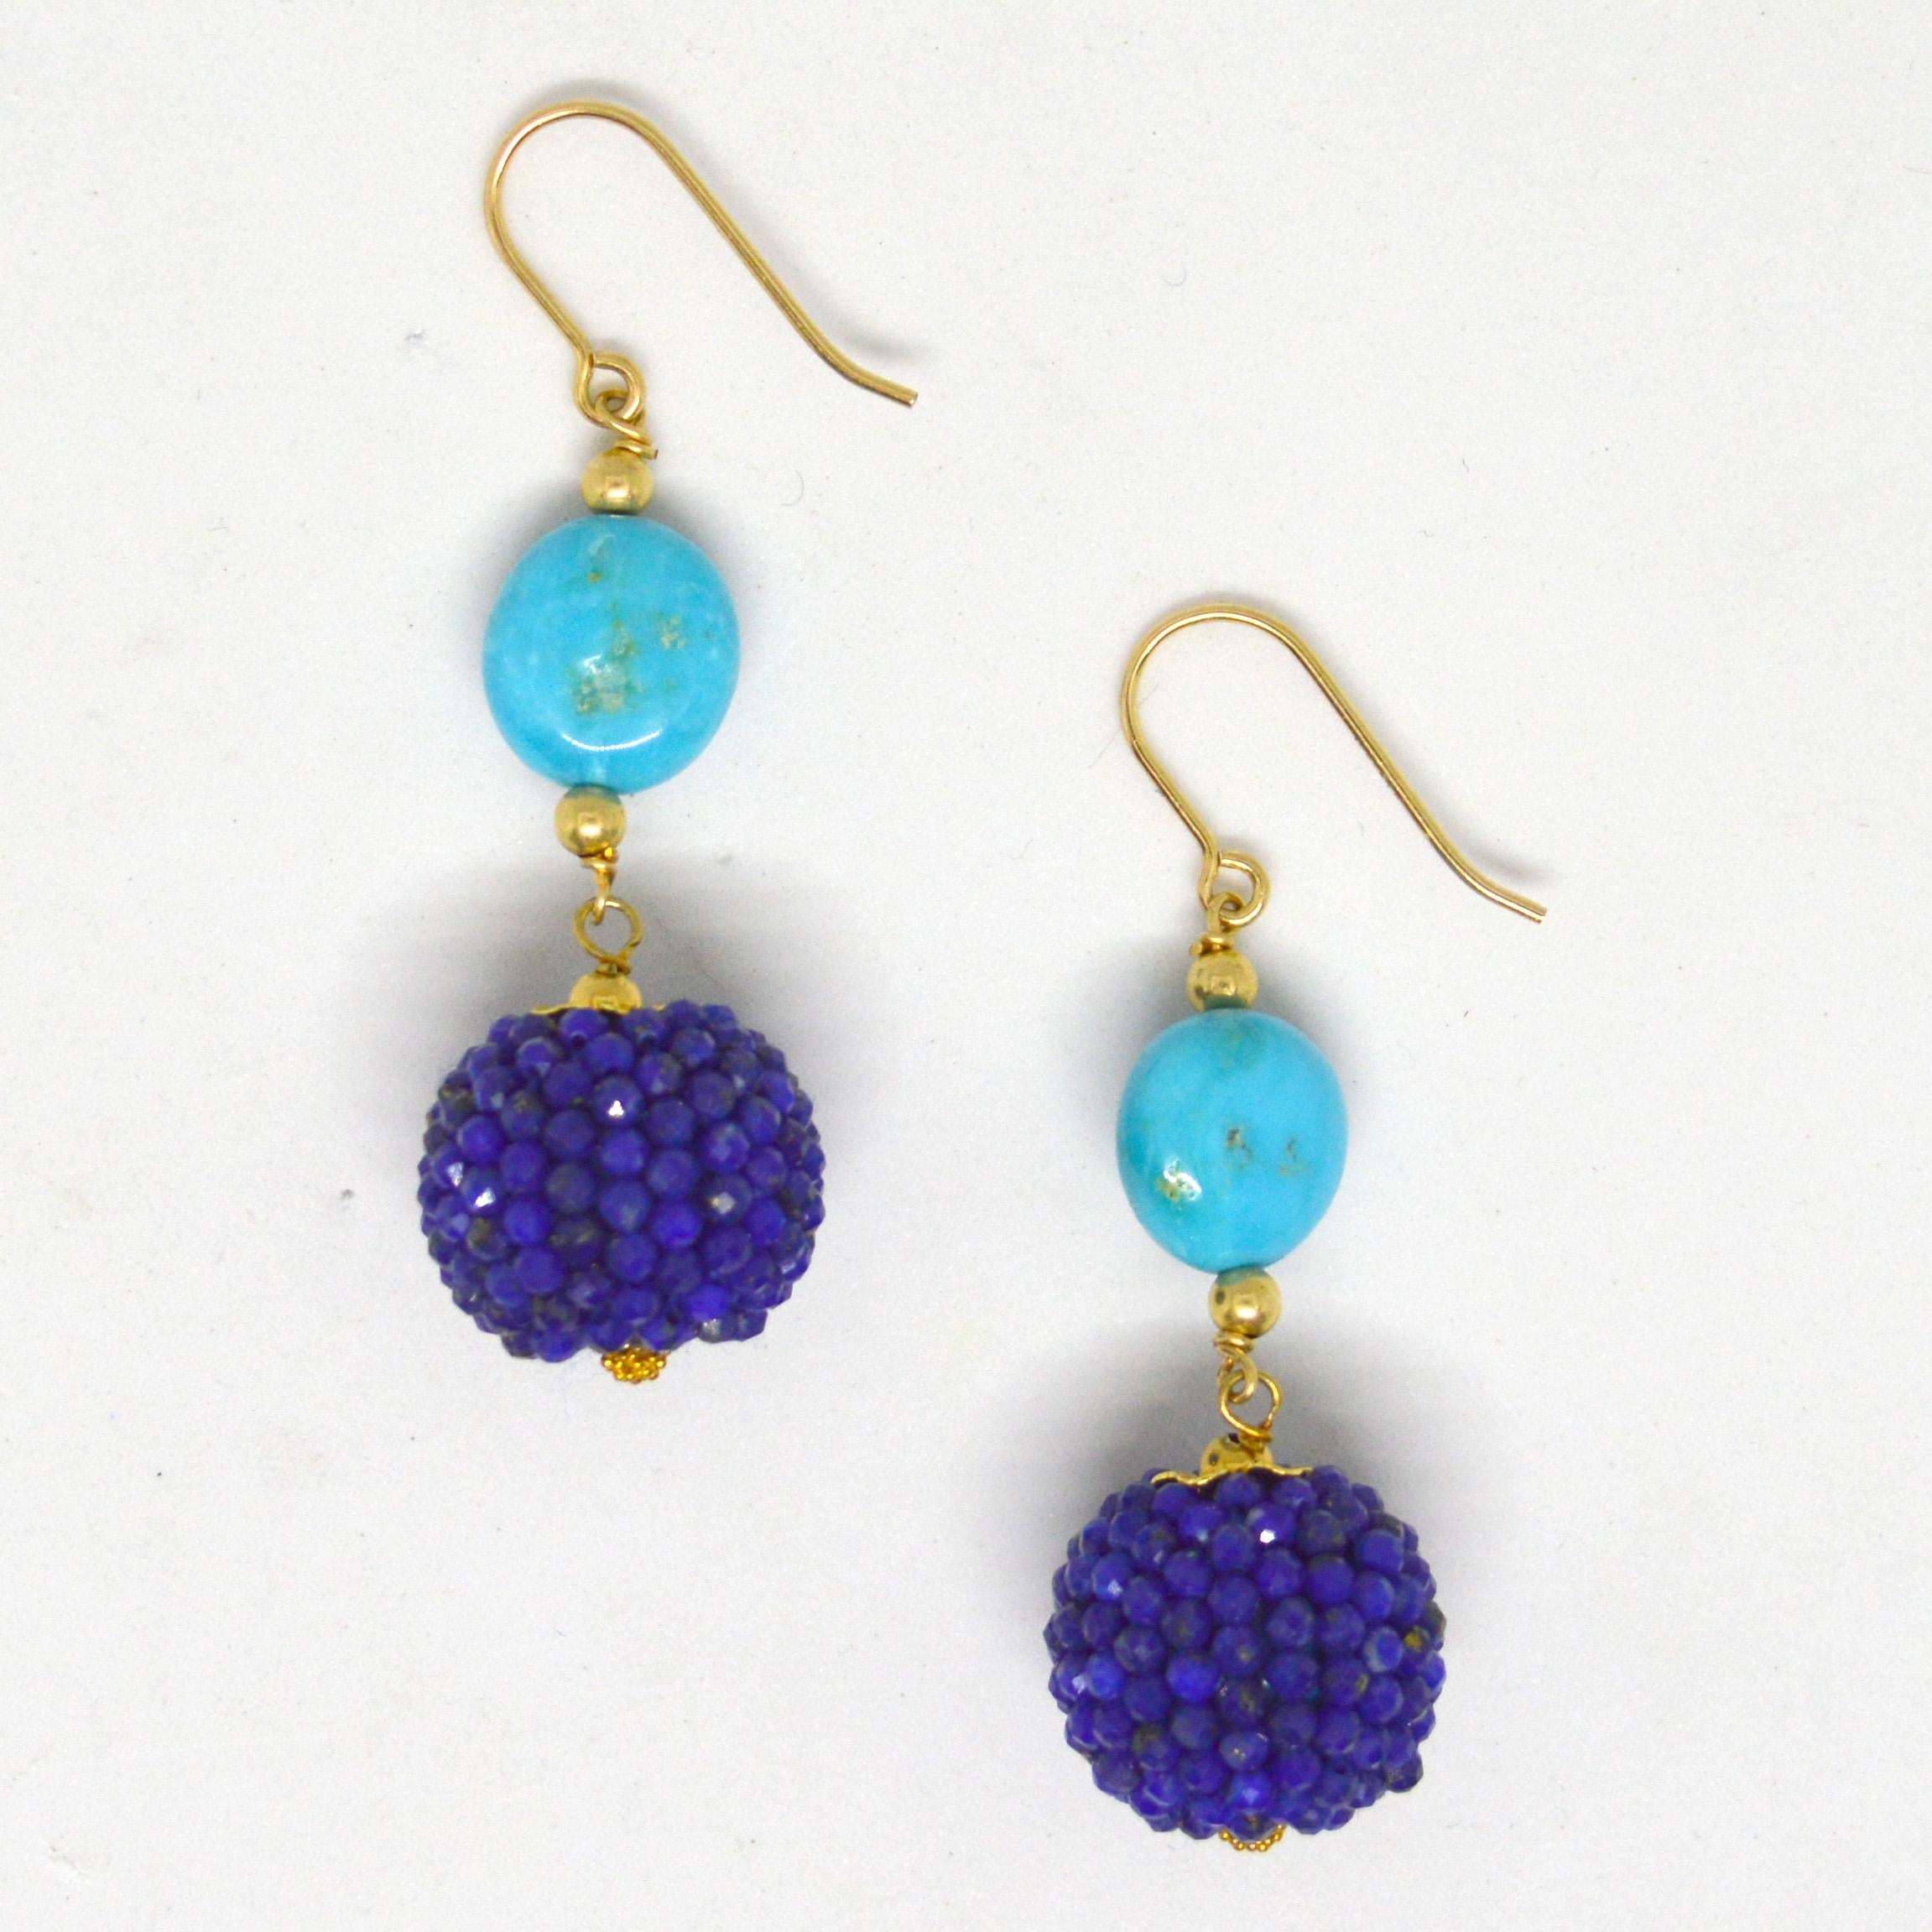 Natural Sleeping Beauty nugget 10mm with a hand made beaded bead of Lapis Lazuli mirco faceted beads 14k Gold Filled headpin and 3mm beads and Sheppard.

Total Earring length 49mm.
